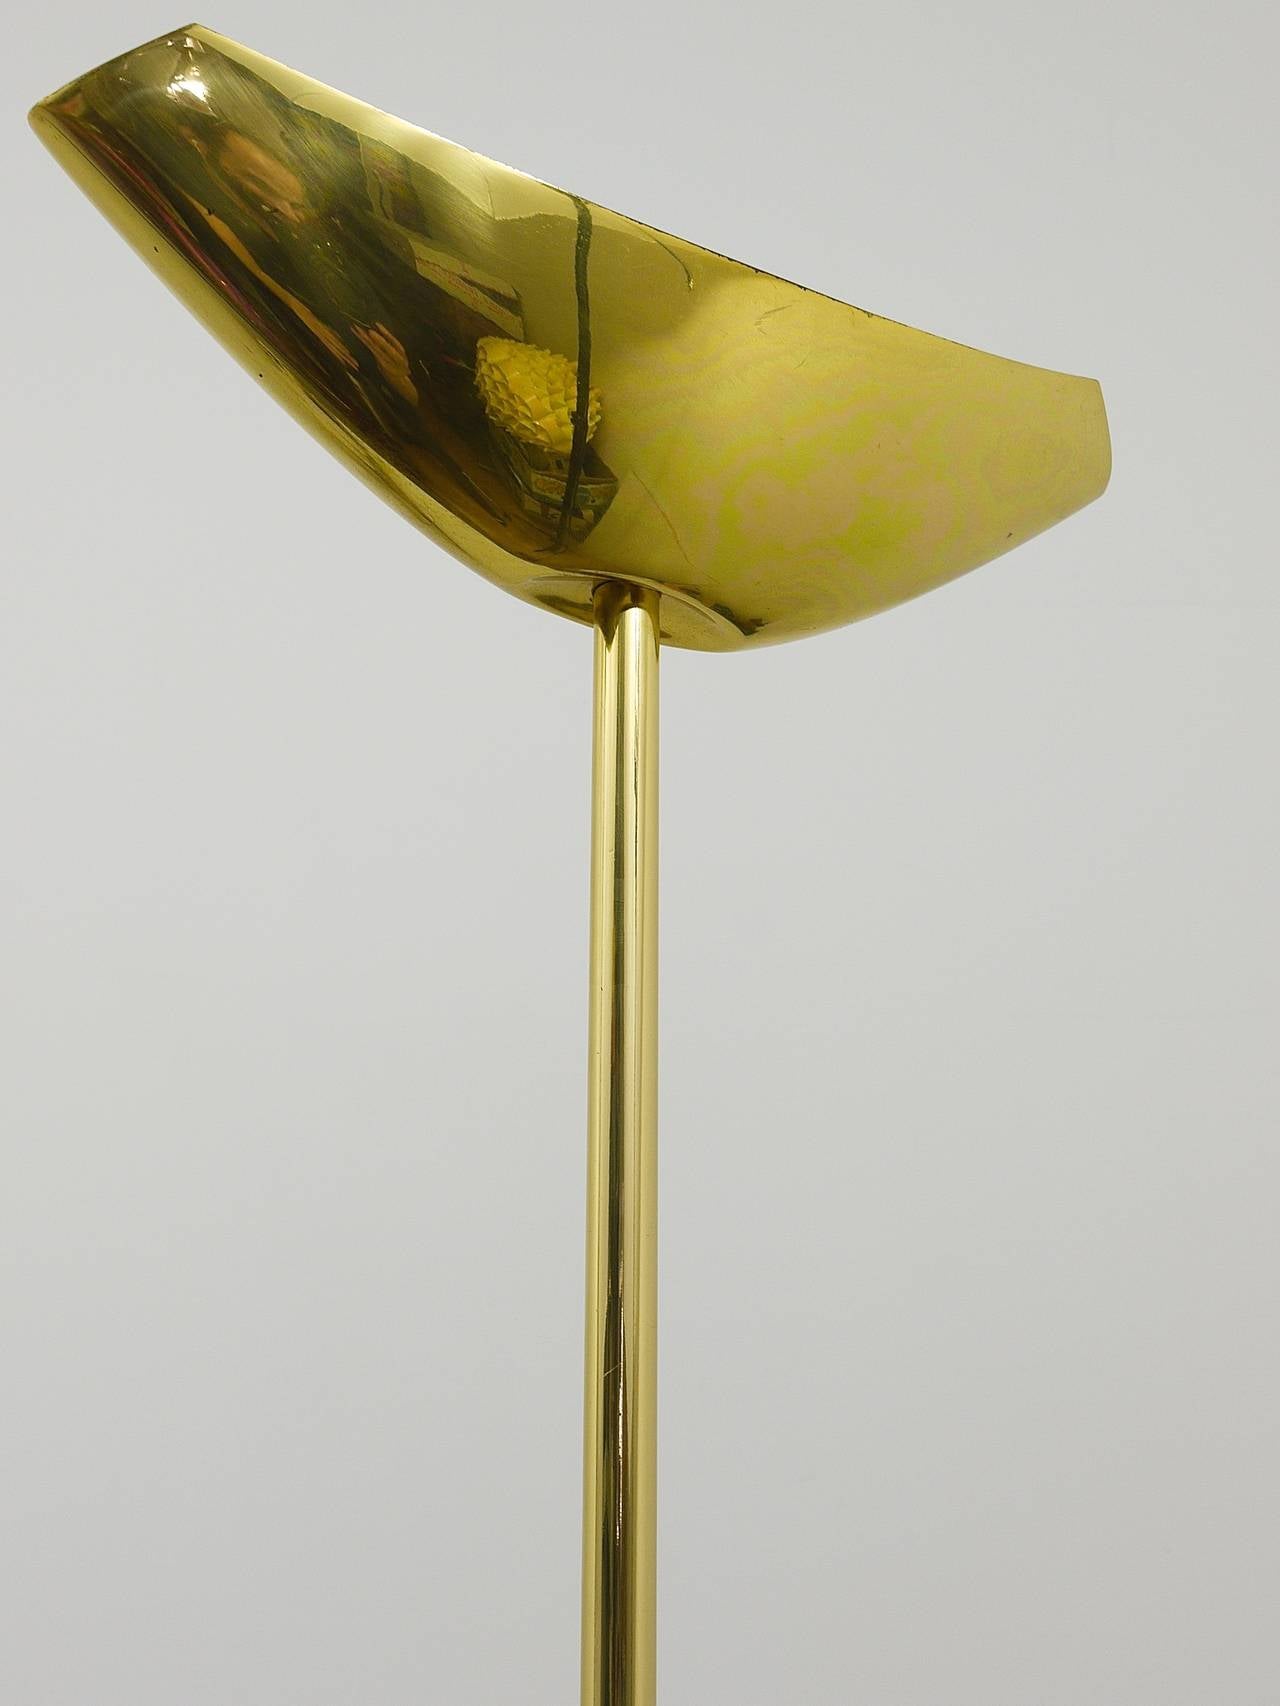 Rodolfo Dordoni Postmodern Brass & Wood Uplight Floor Lamp, Italy, 1980s In Good Condition For Sale In Vienna, AT